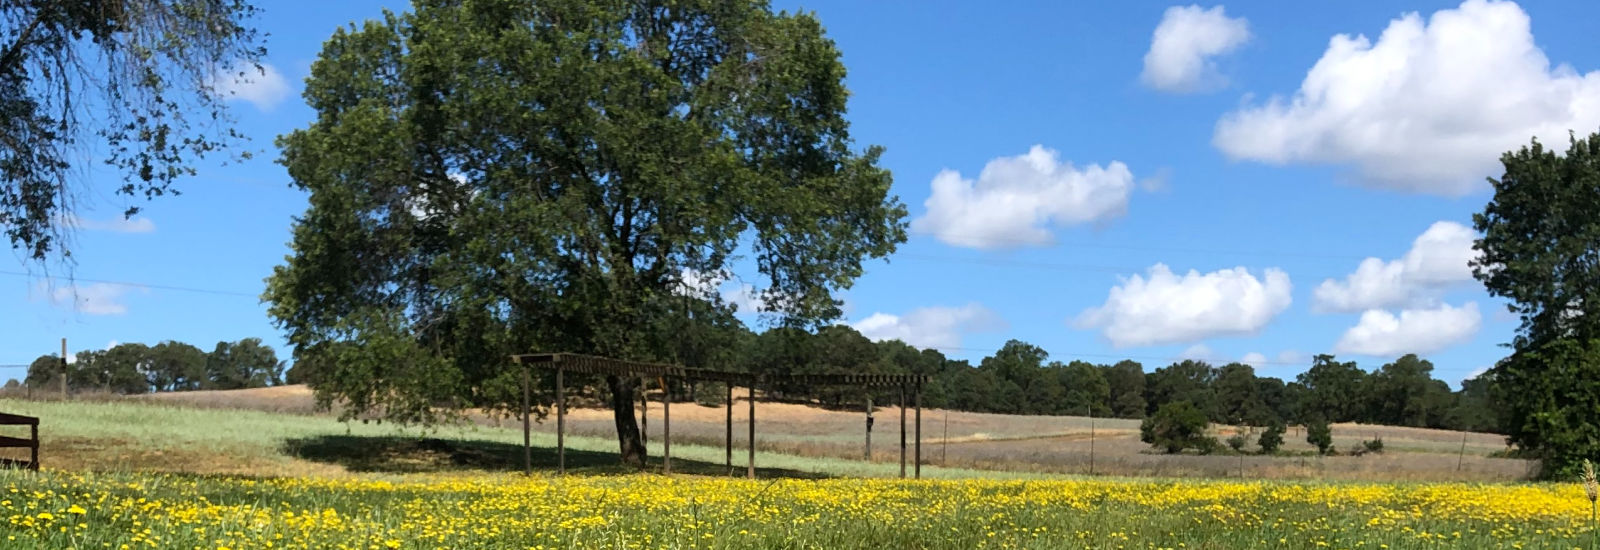 Roseville Divorce Attorney: This is a photo of a tree in a field of yellow flowers.